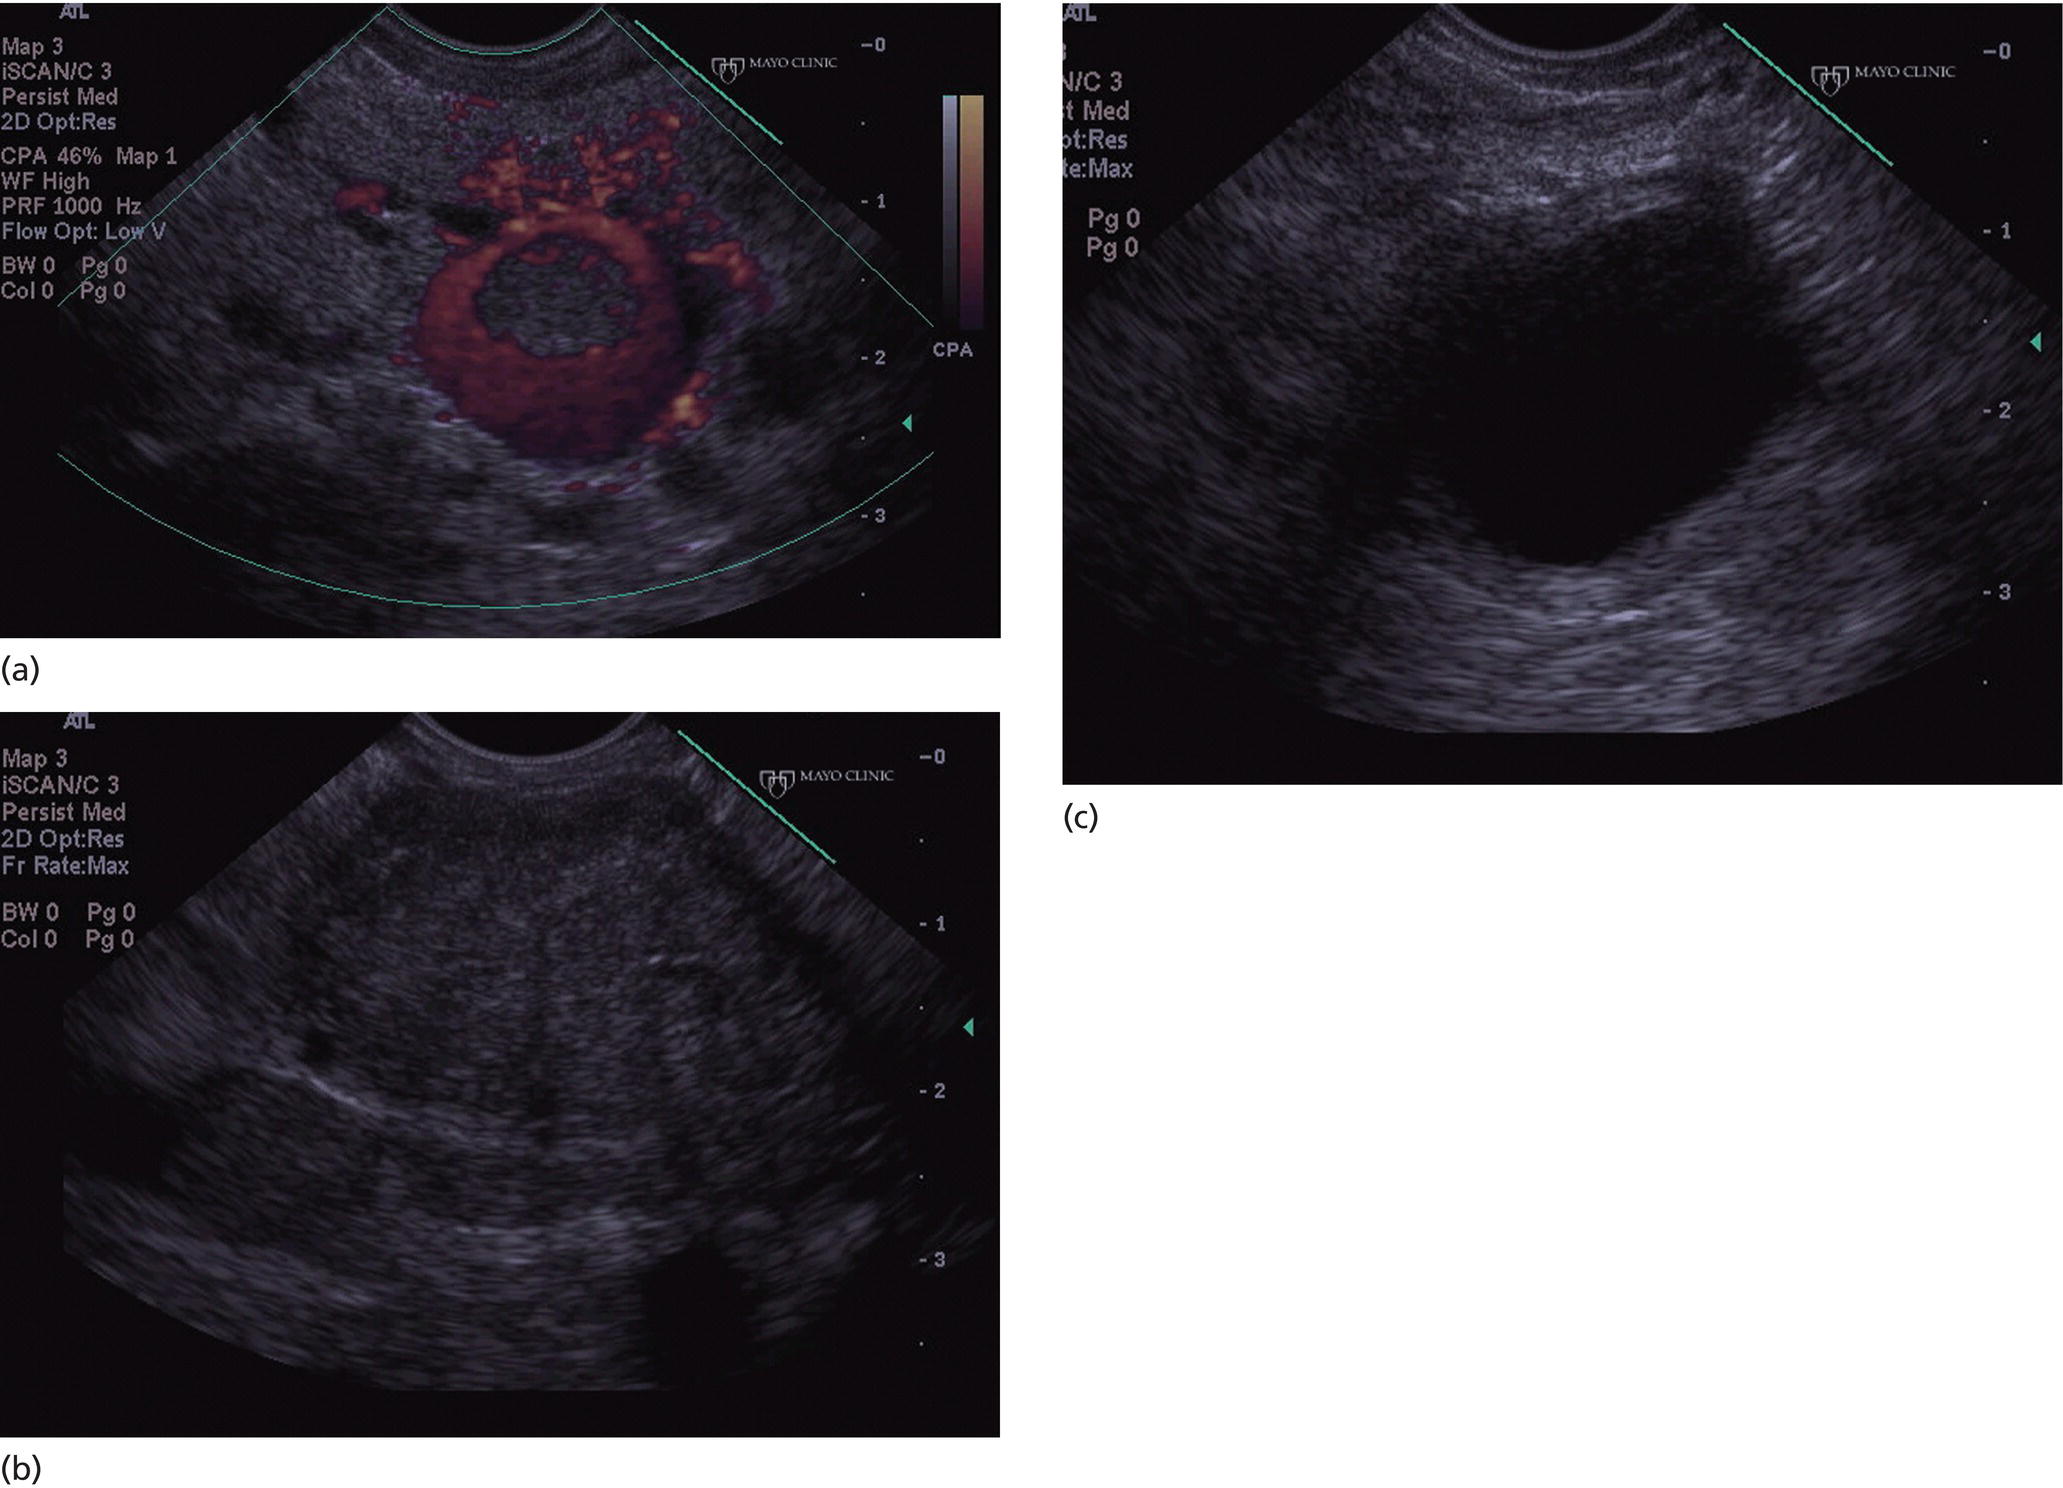 Photos depict images obtained from a patient with a gastrinoma following helical computed tomography (CT) that revealed a pancreatic cyst that was not felt to represent a gastrinoma.